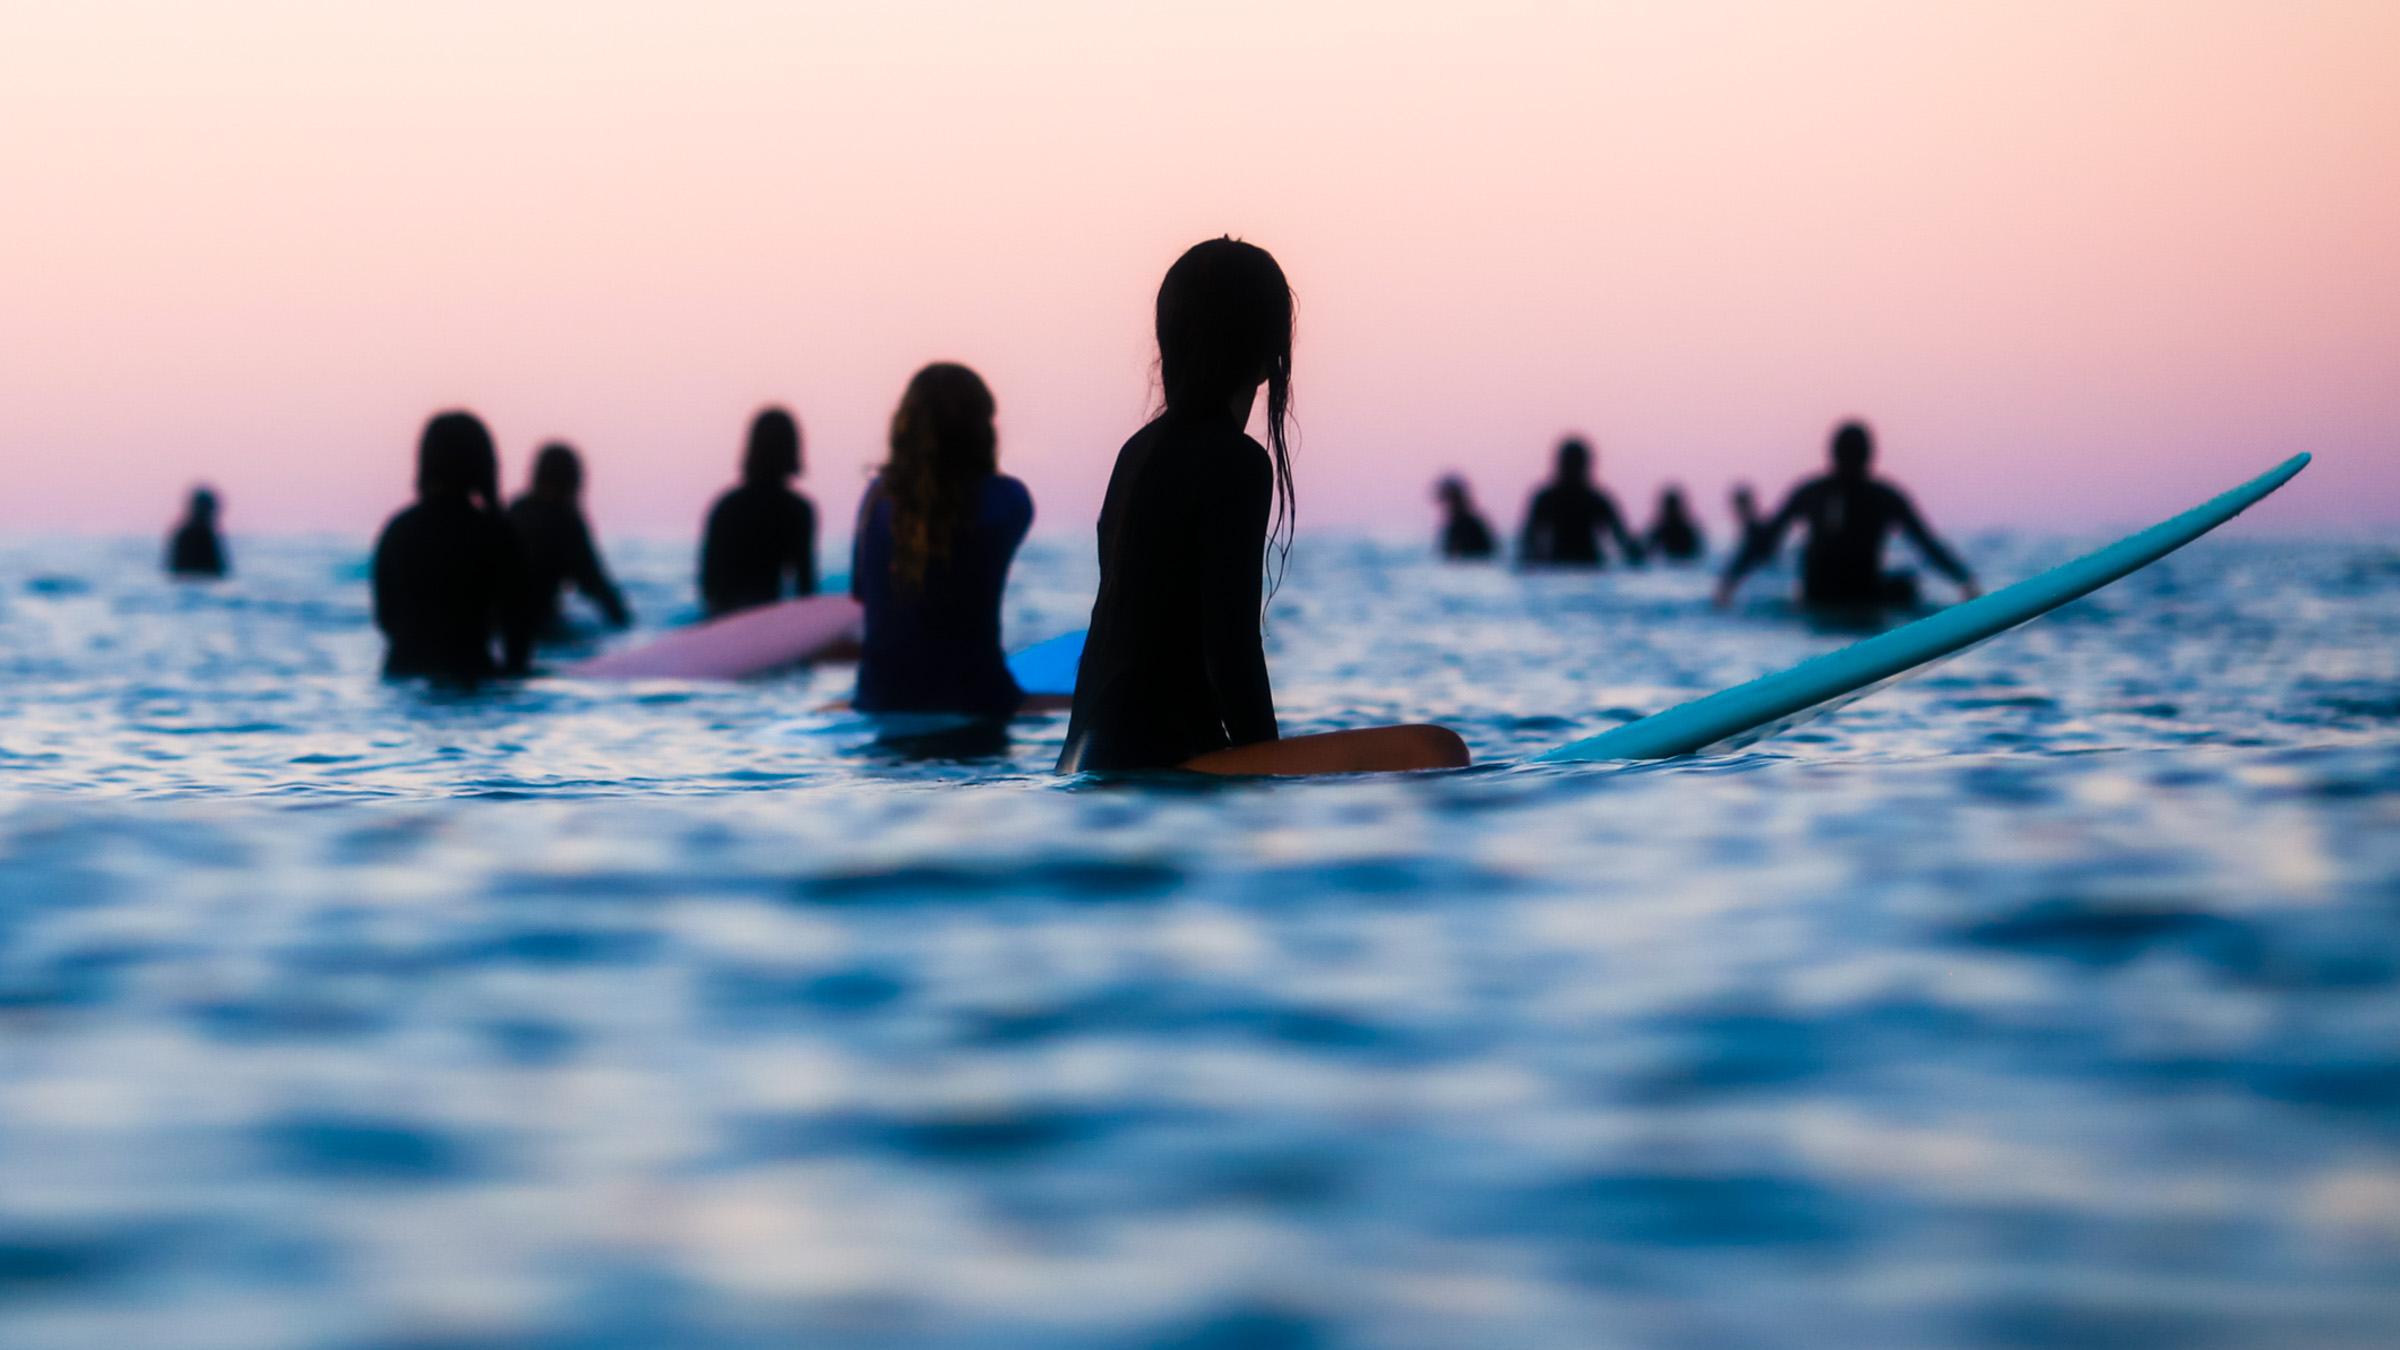 Group of surfers in the water silhouetted against a pink sky, waiting for a wave